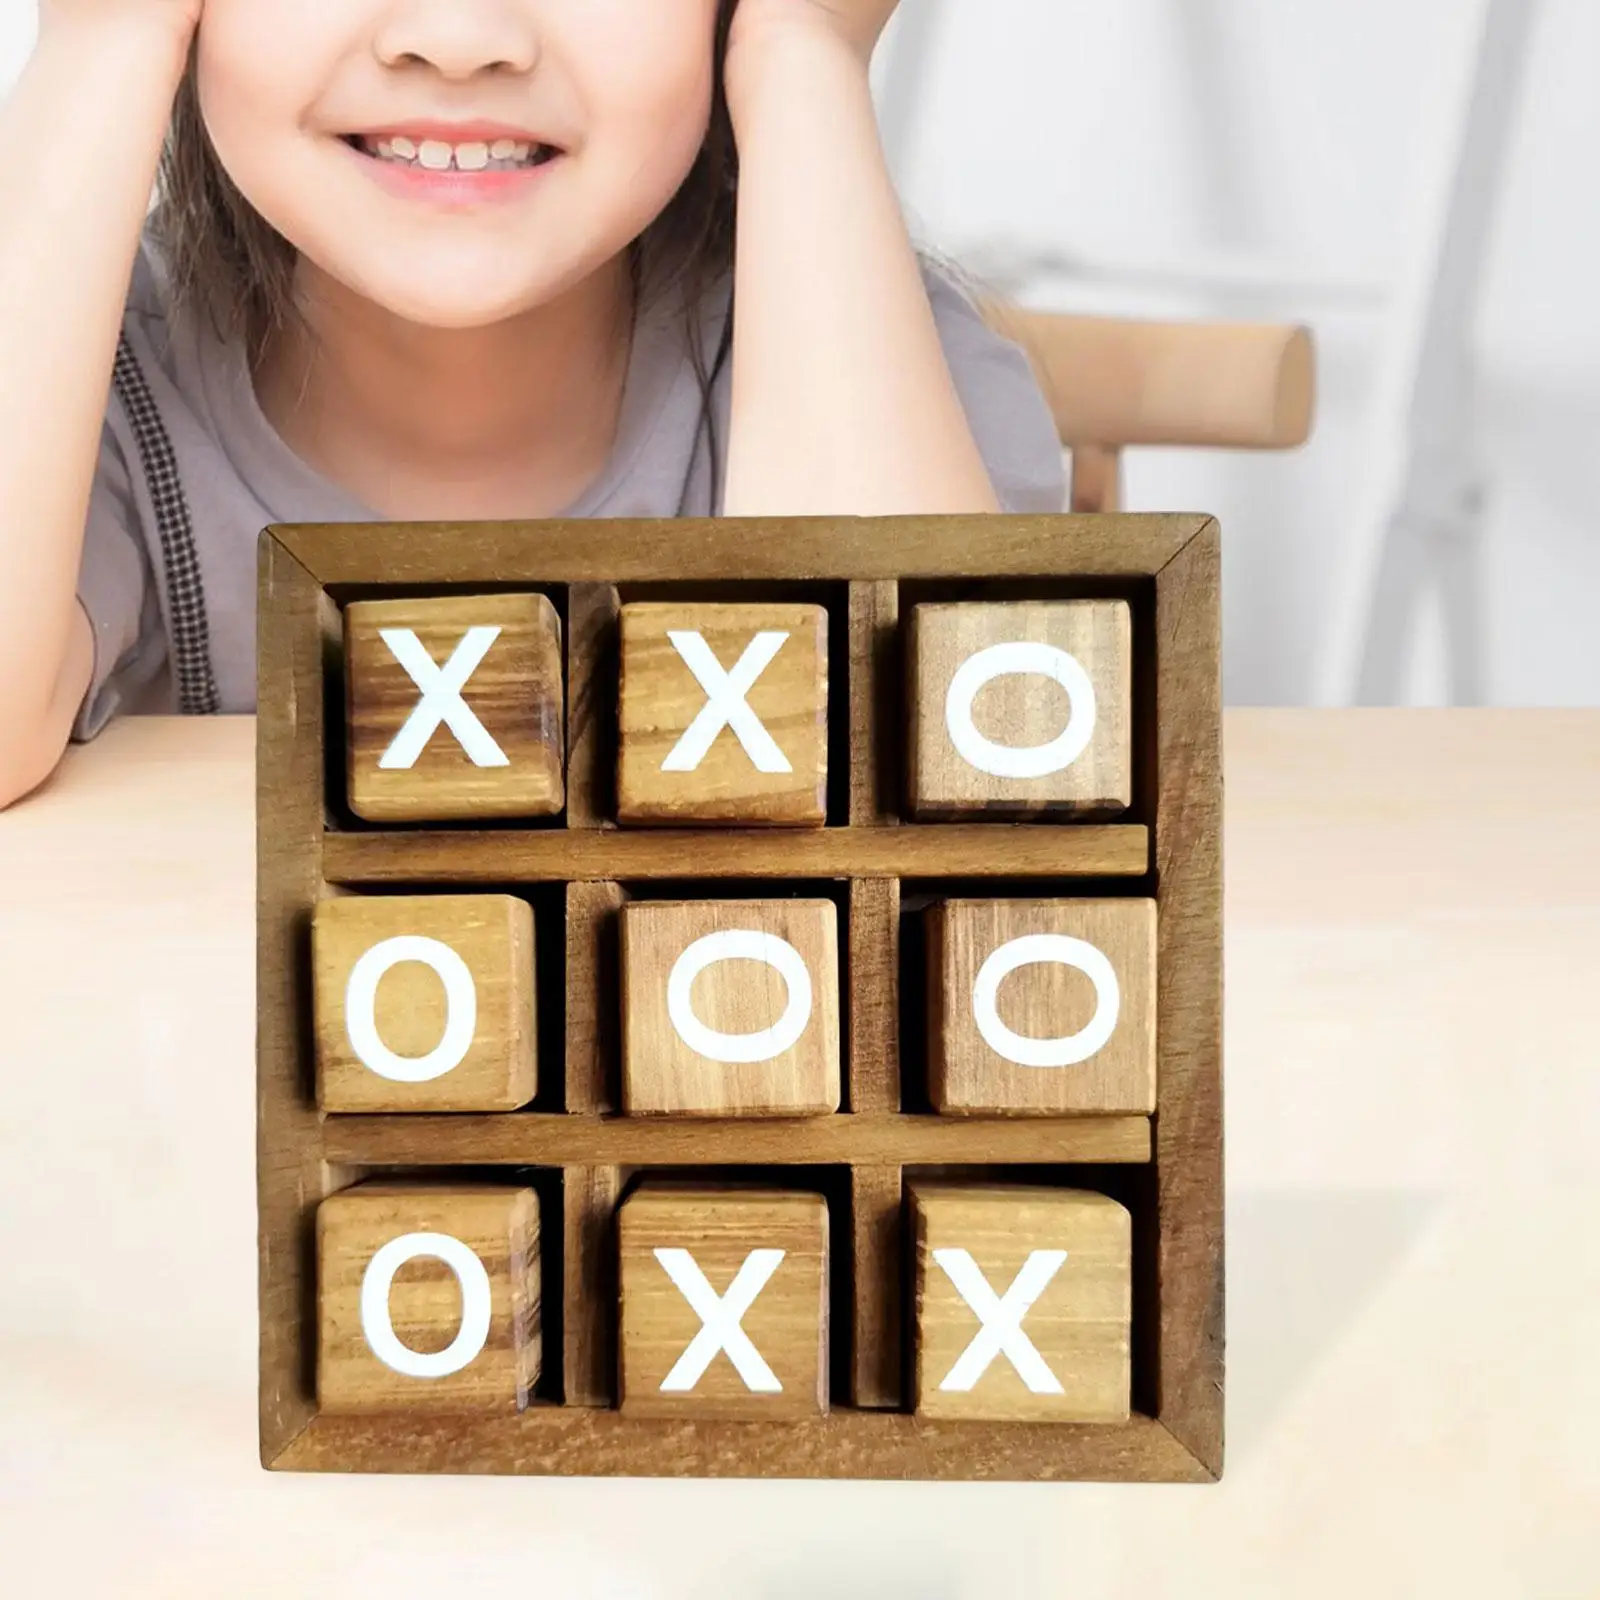 Tic TAC Toe Game Strategy Board Games Fun Indoor Brain Teaser for Living Room Family